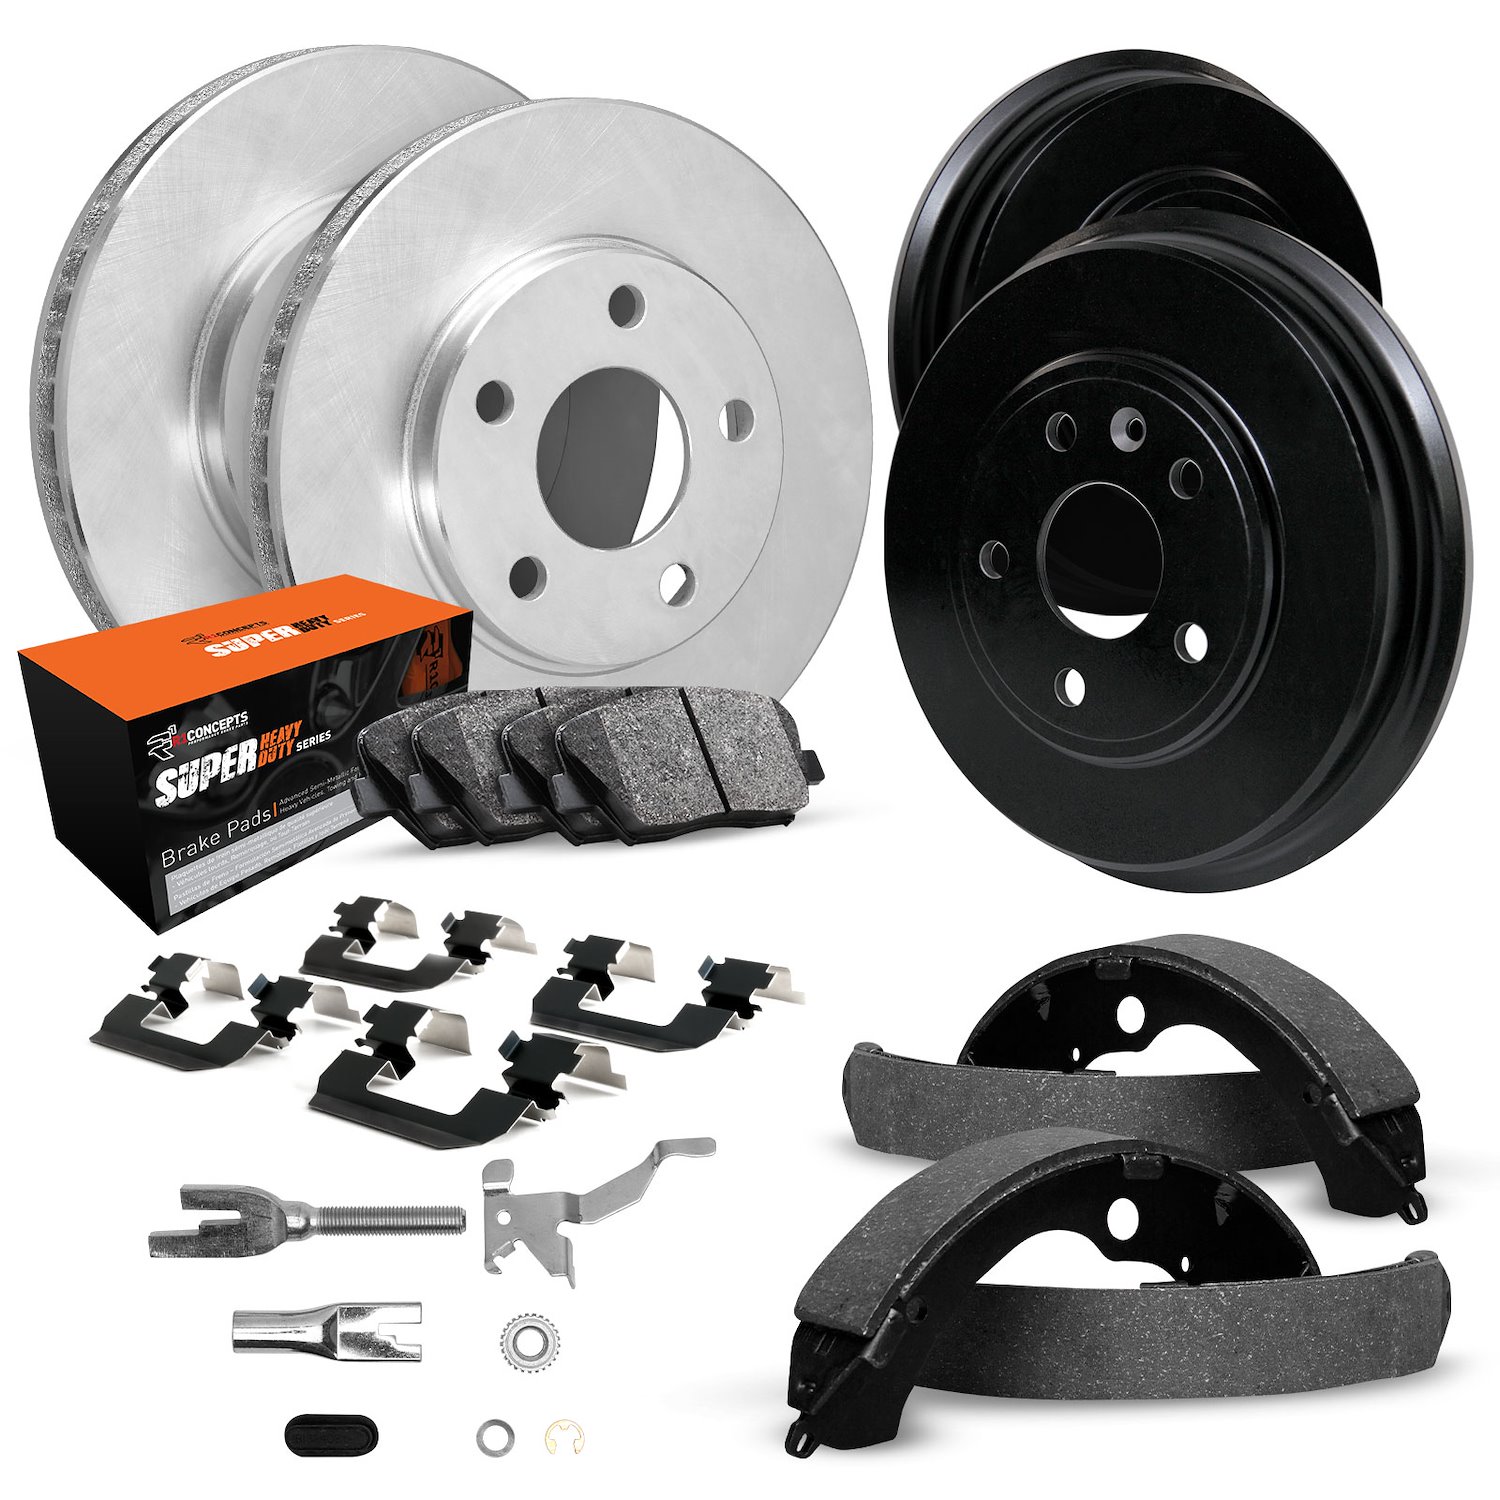 E-Line Blank Brake Rotor & Drum Set w/Super-Duty Pads, Shoes, Hardware, & Adjusters, 1990-2000 GM, Position: Front & Rear